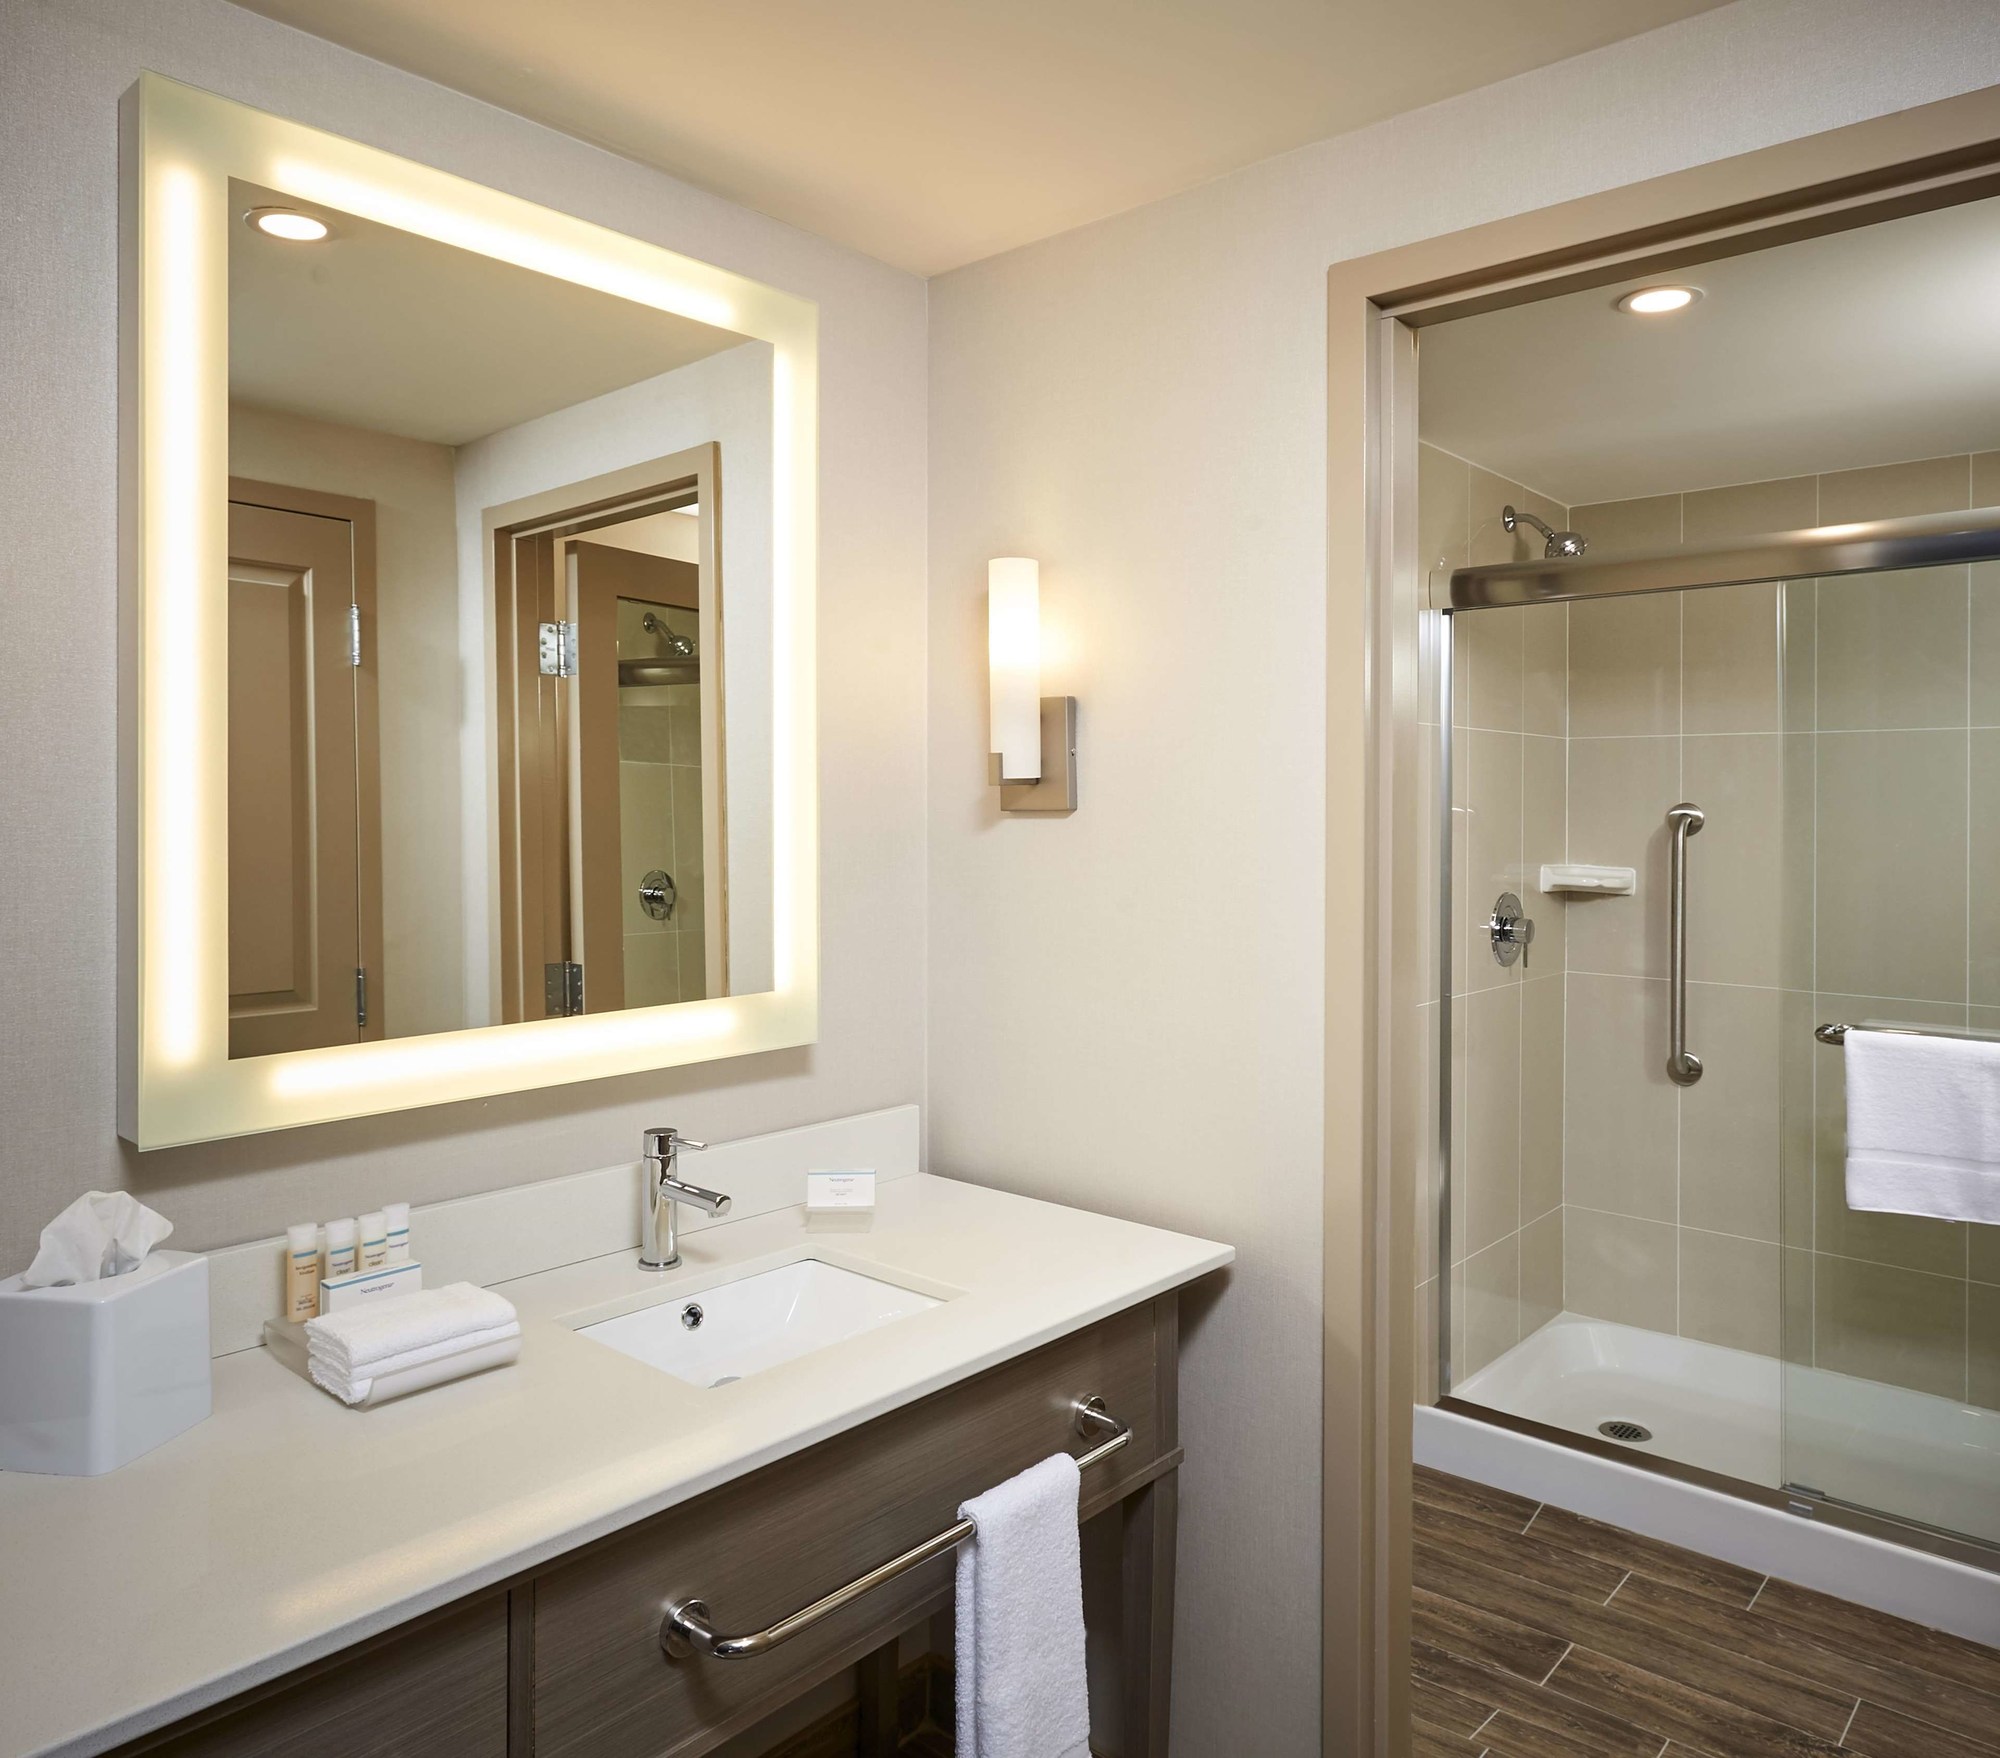 Homewood Suites by Hilton North Bay